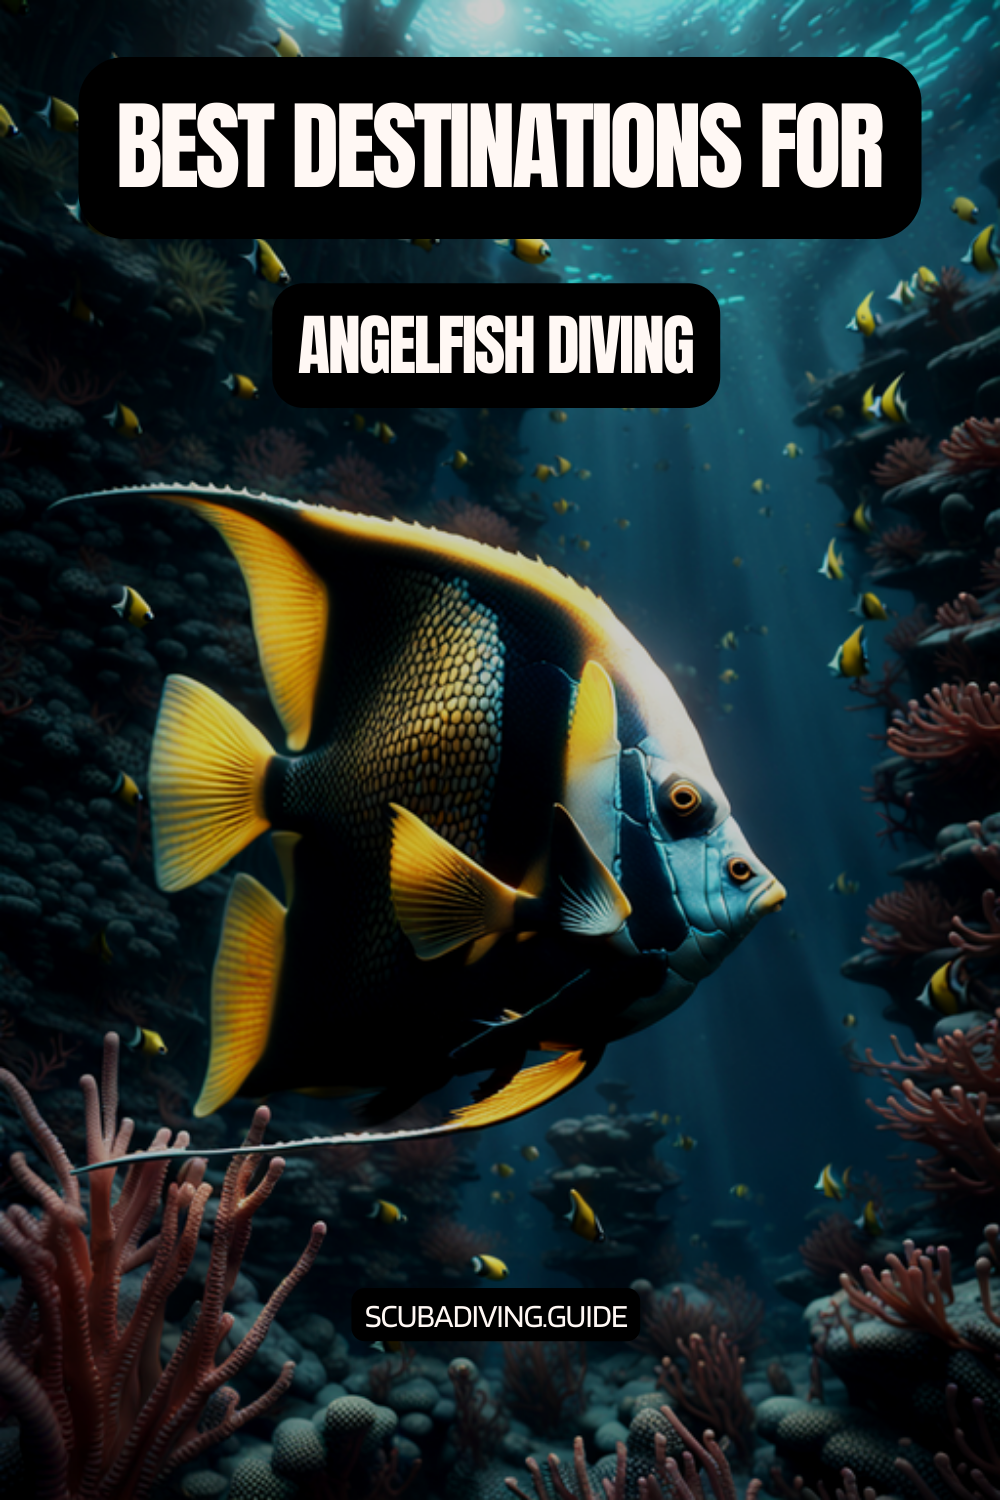 Best Destinations for Diving with Angelfish